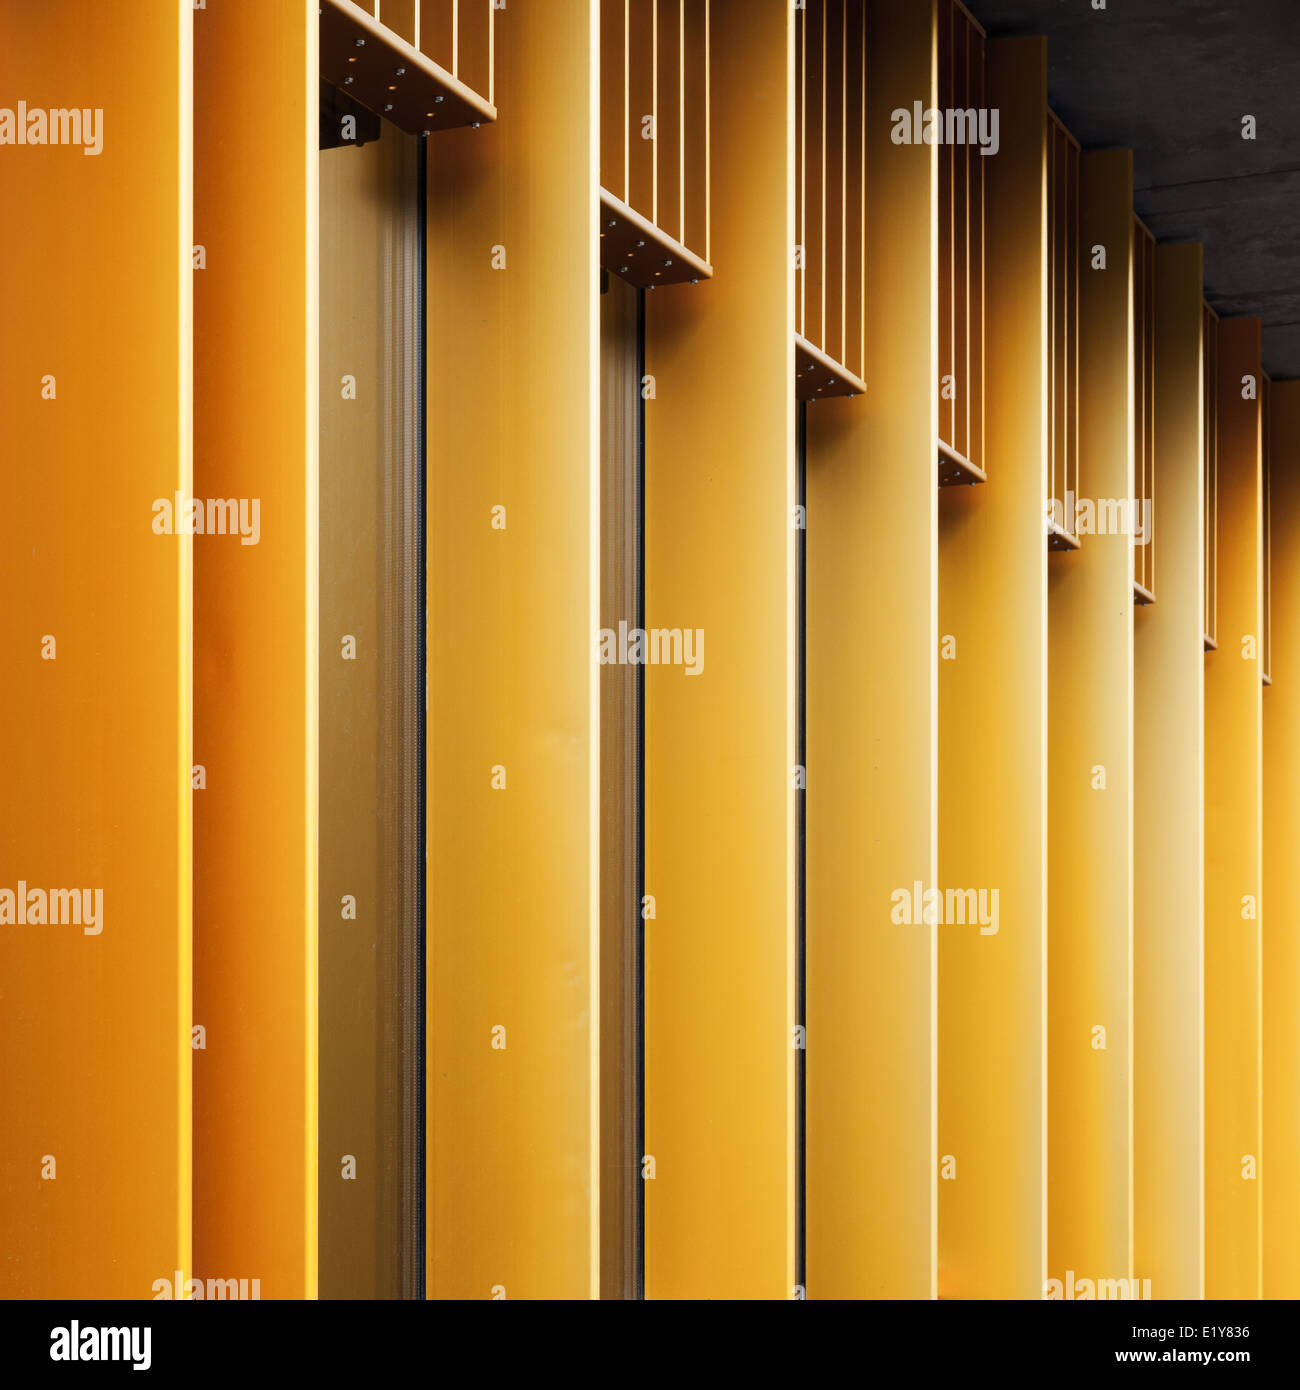 Abstract architecture fragment with yellow metal facade and windows Stock Photo